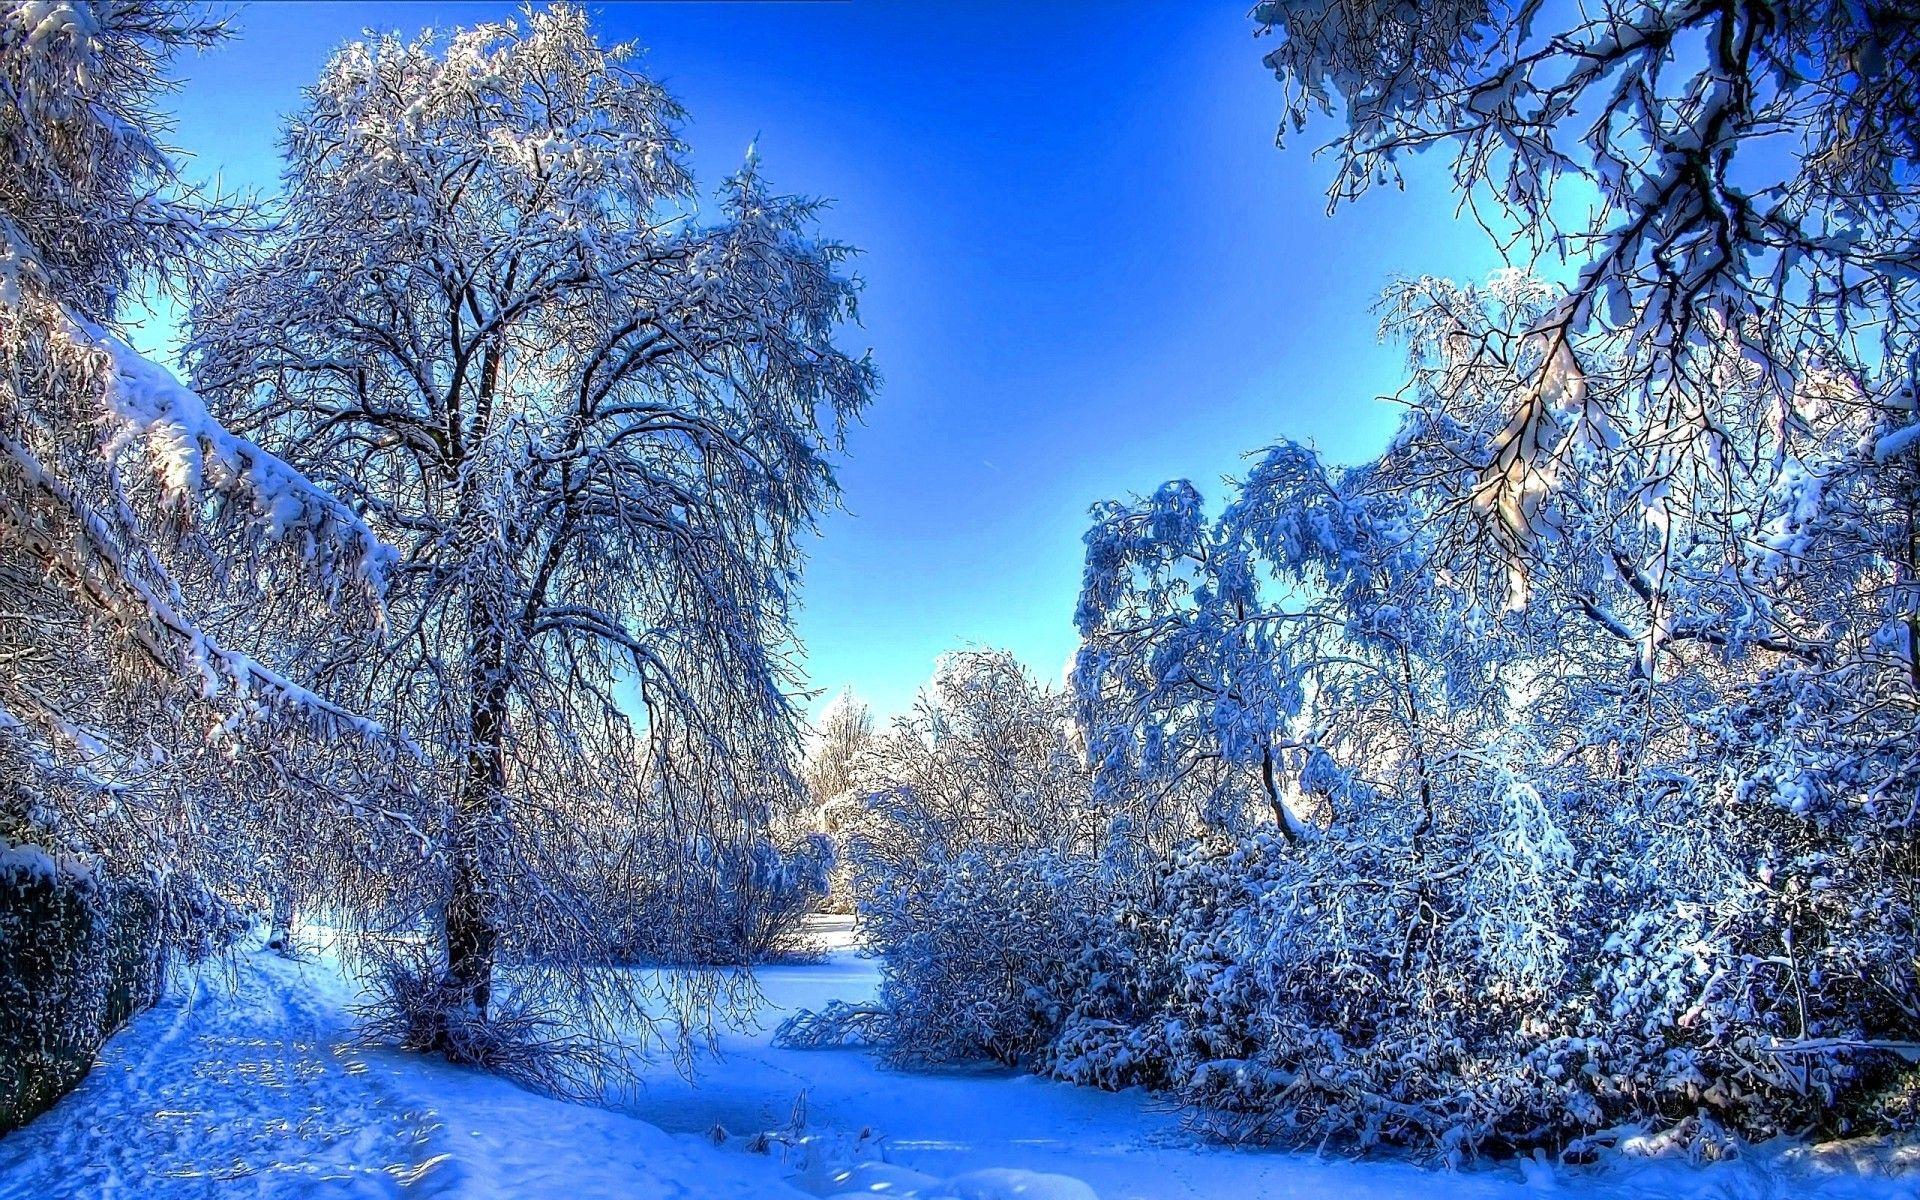 Winter Snow Landscape. Android wallpapers for free